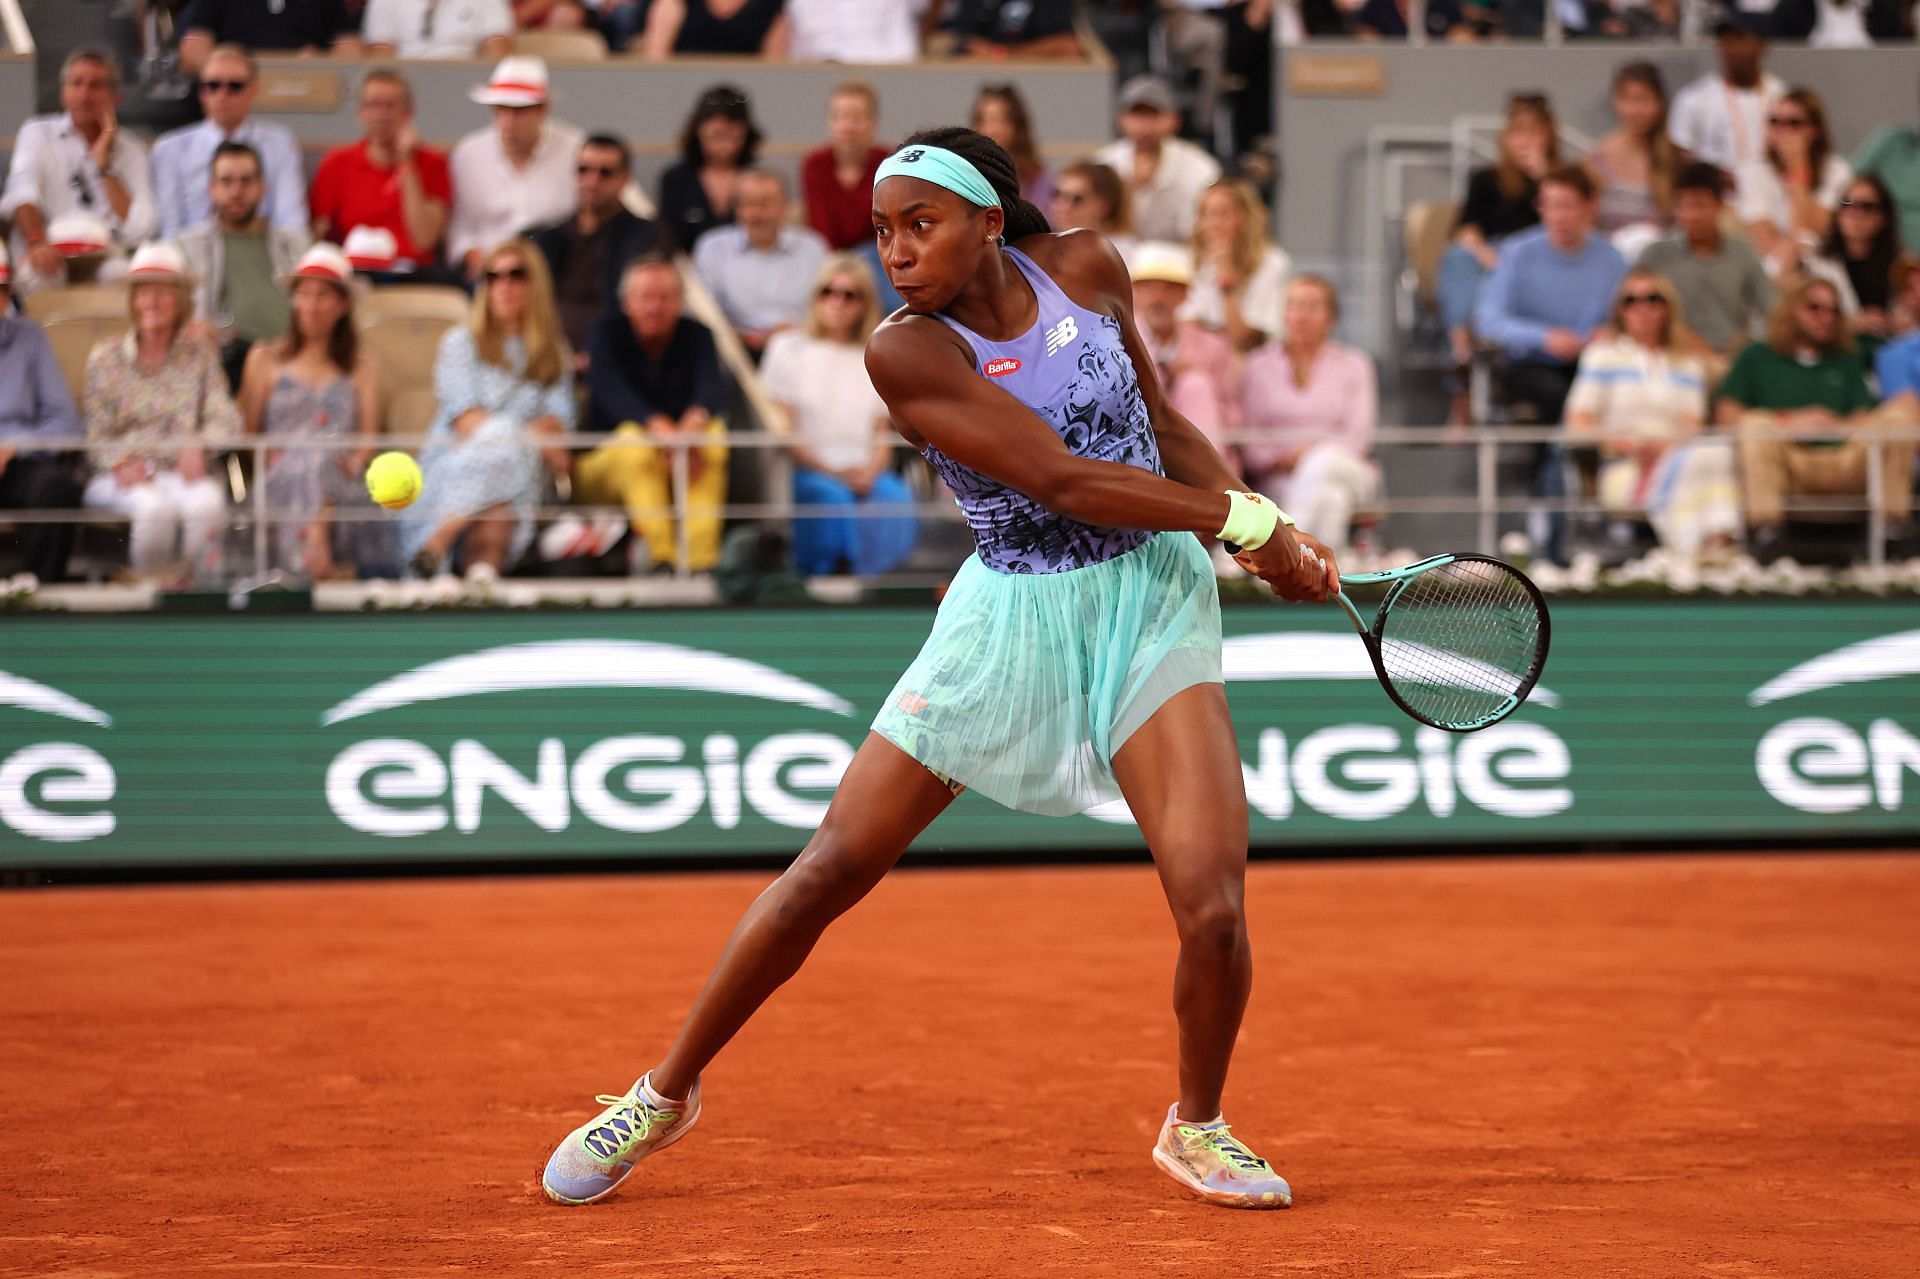 Gauff has moved up to 13th in the WTA rankings